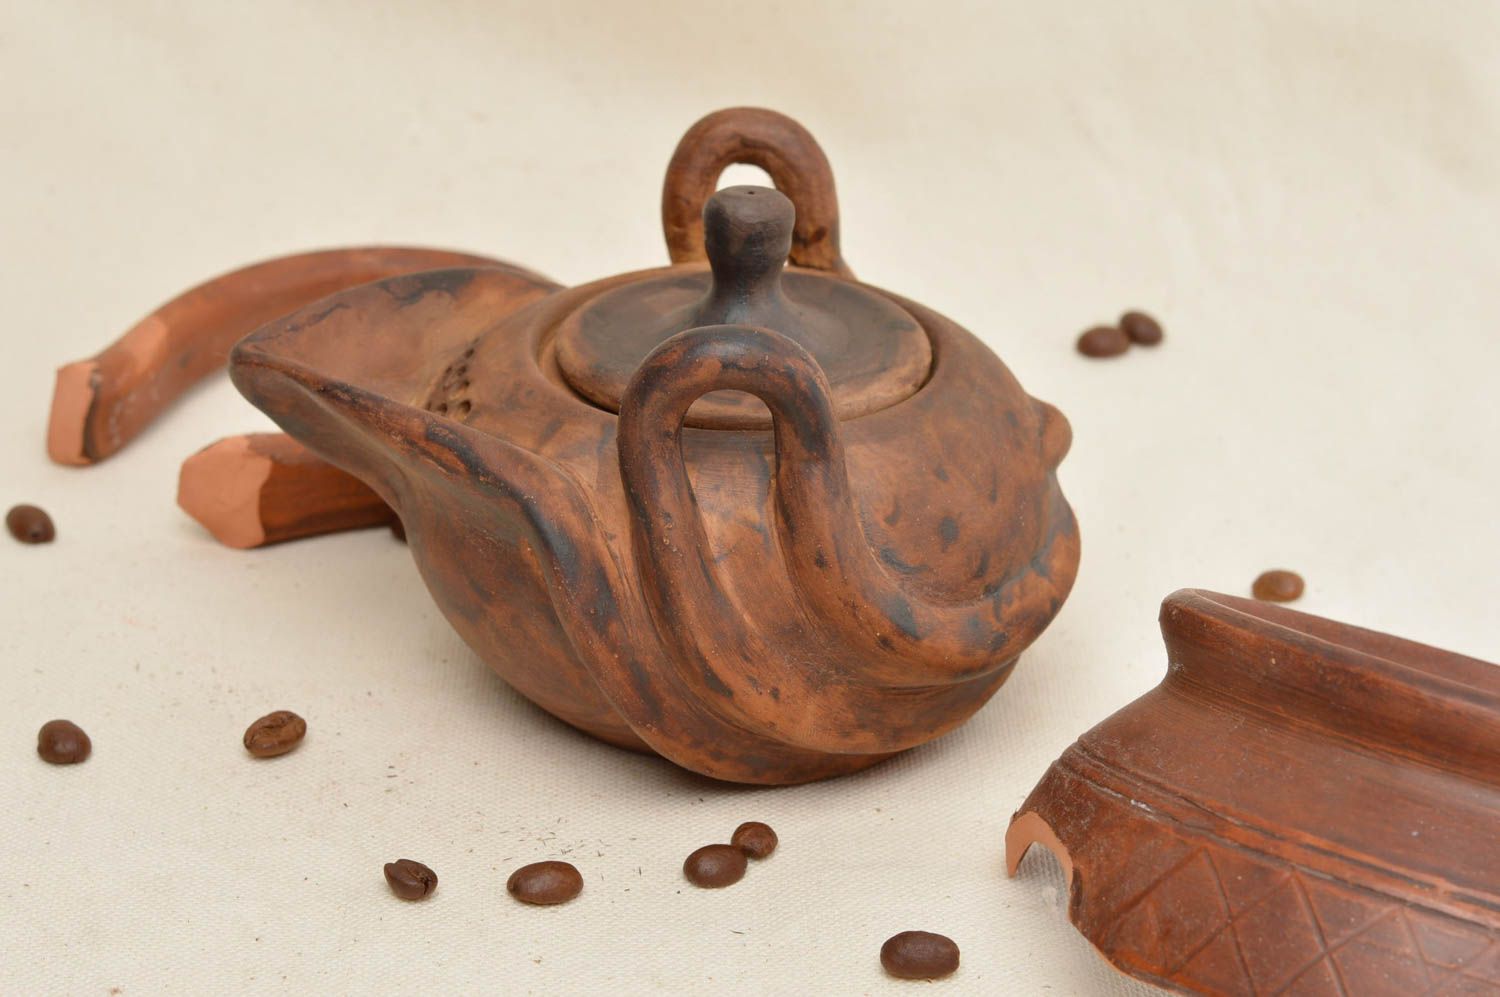 Unusual shaped handmade ceramic teapot clay teapot designs collectible item photo 1